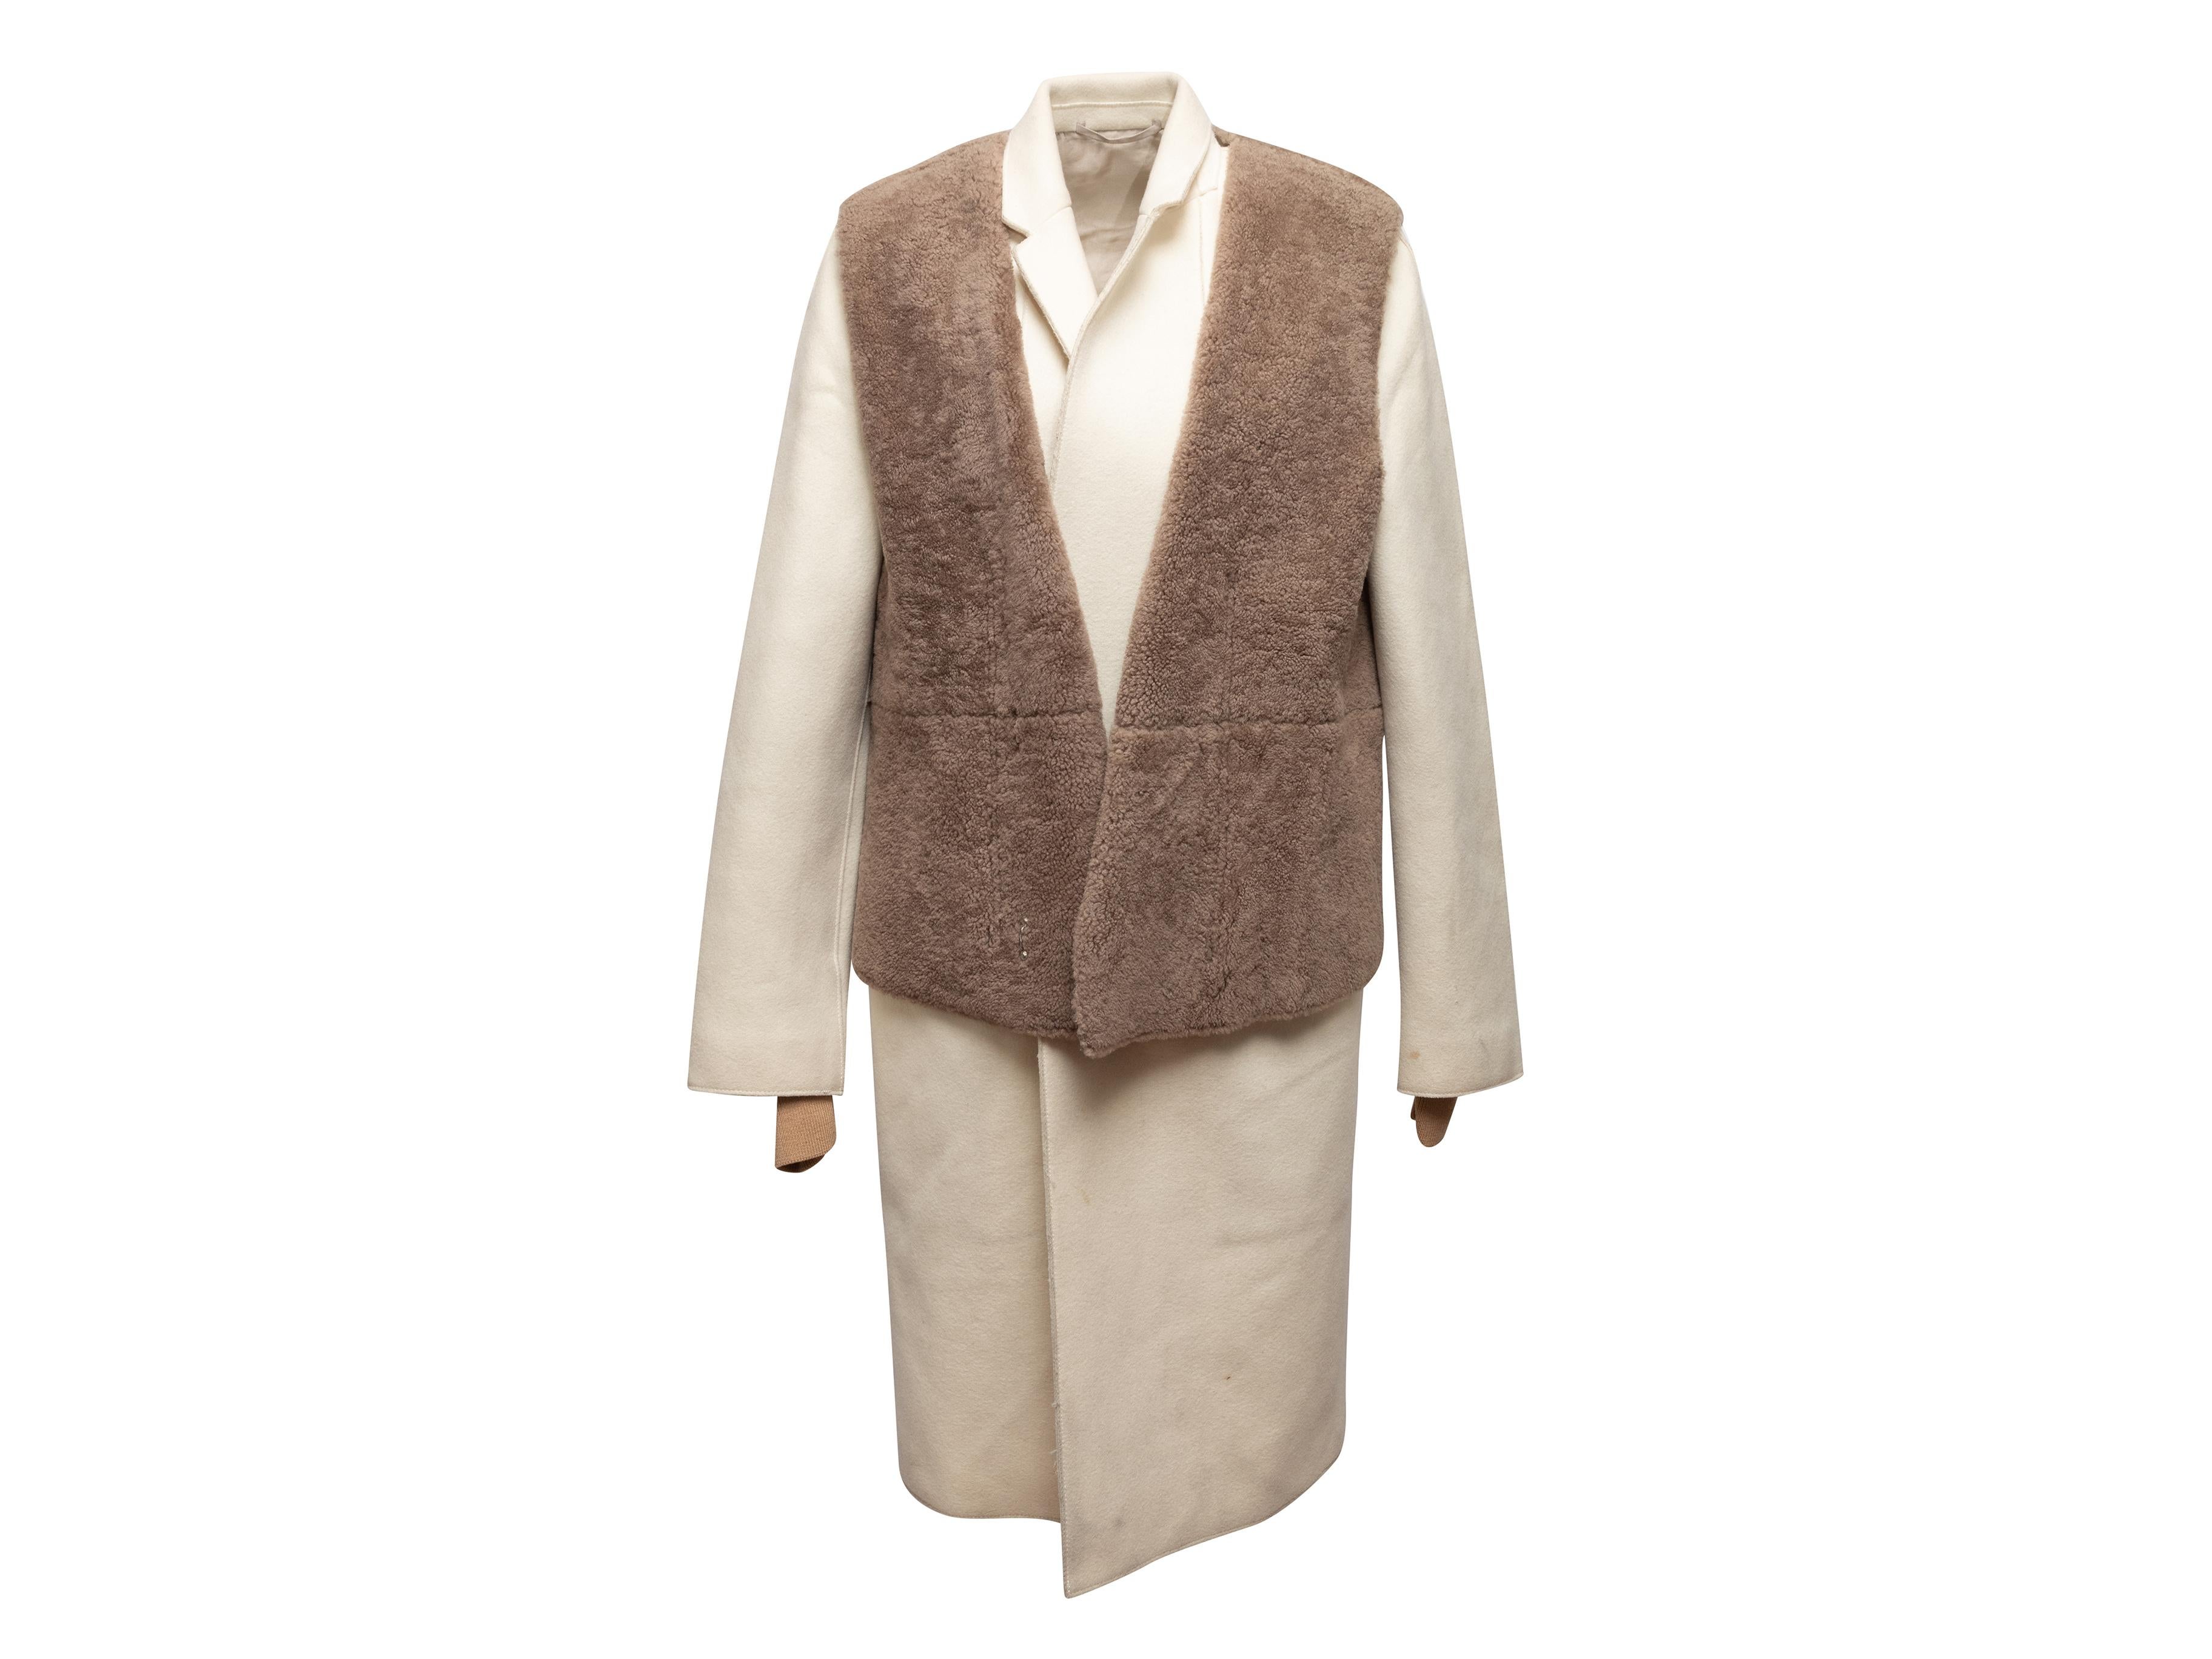 Cream long coat by Phillip Lim. Notched collar. Dual hip pockets. Detachable light brown shearling vest overlay. Concealed front closure. 40